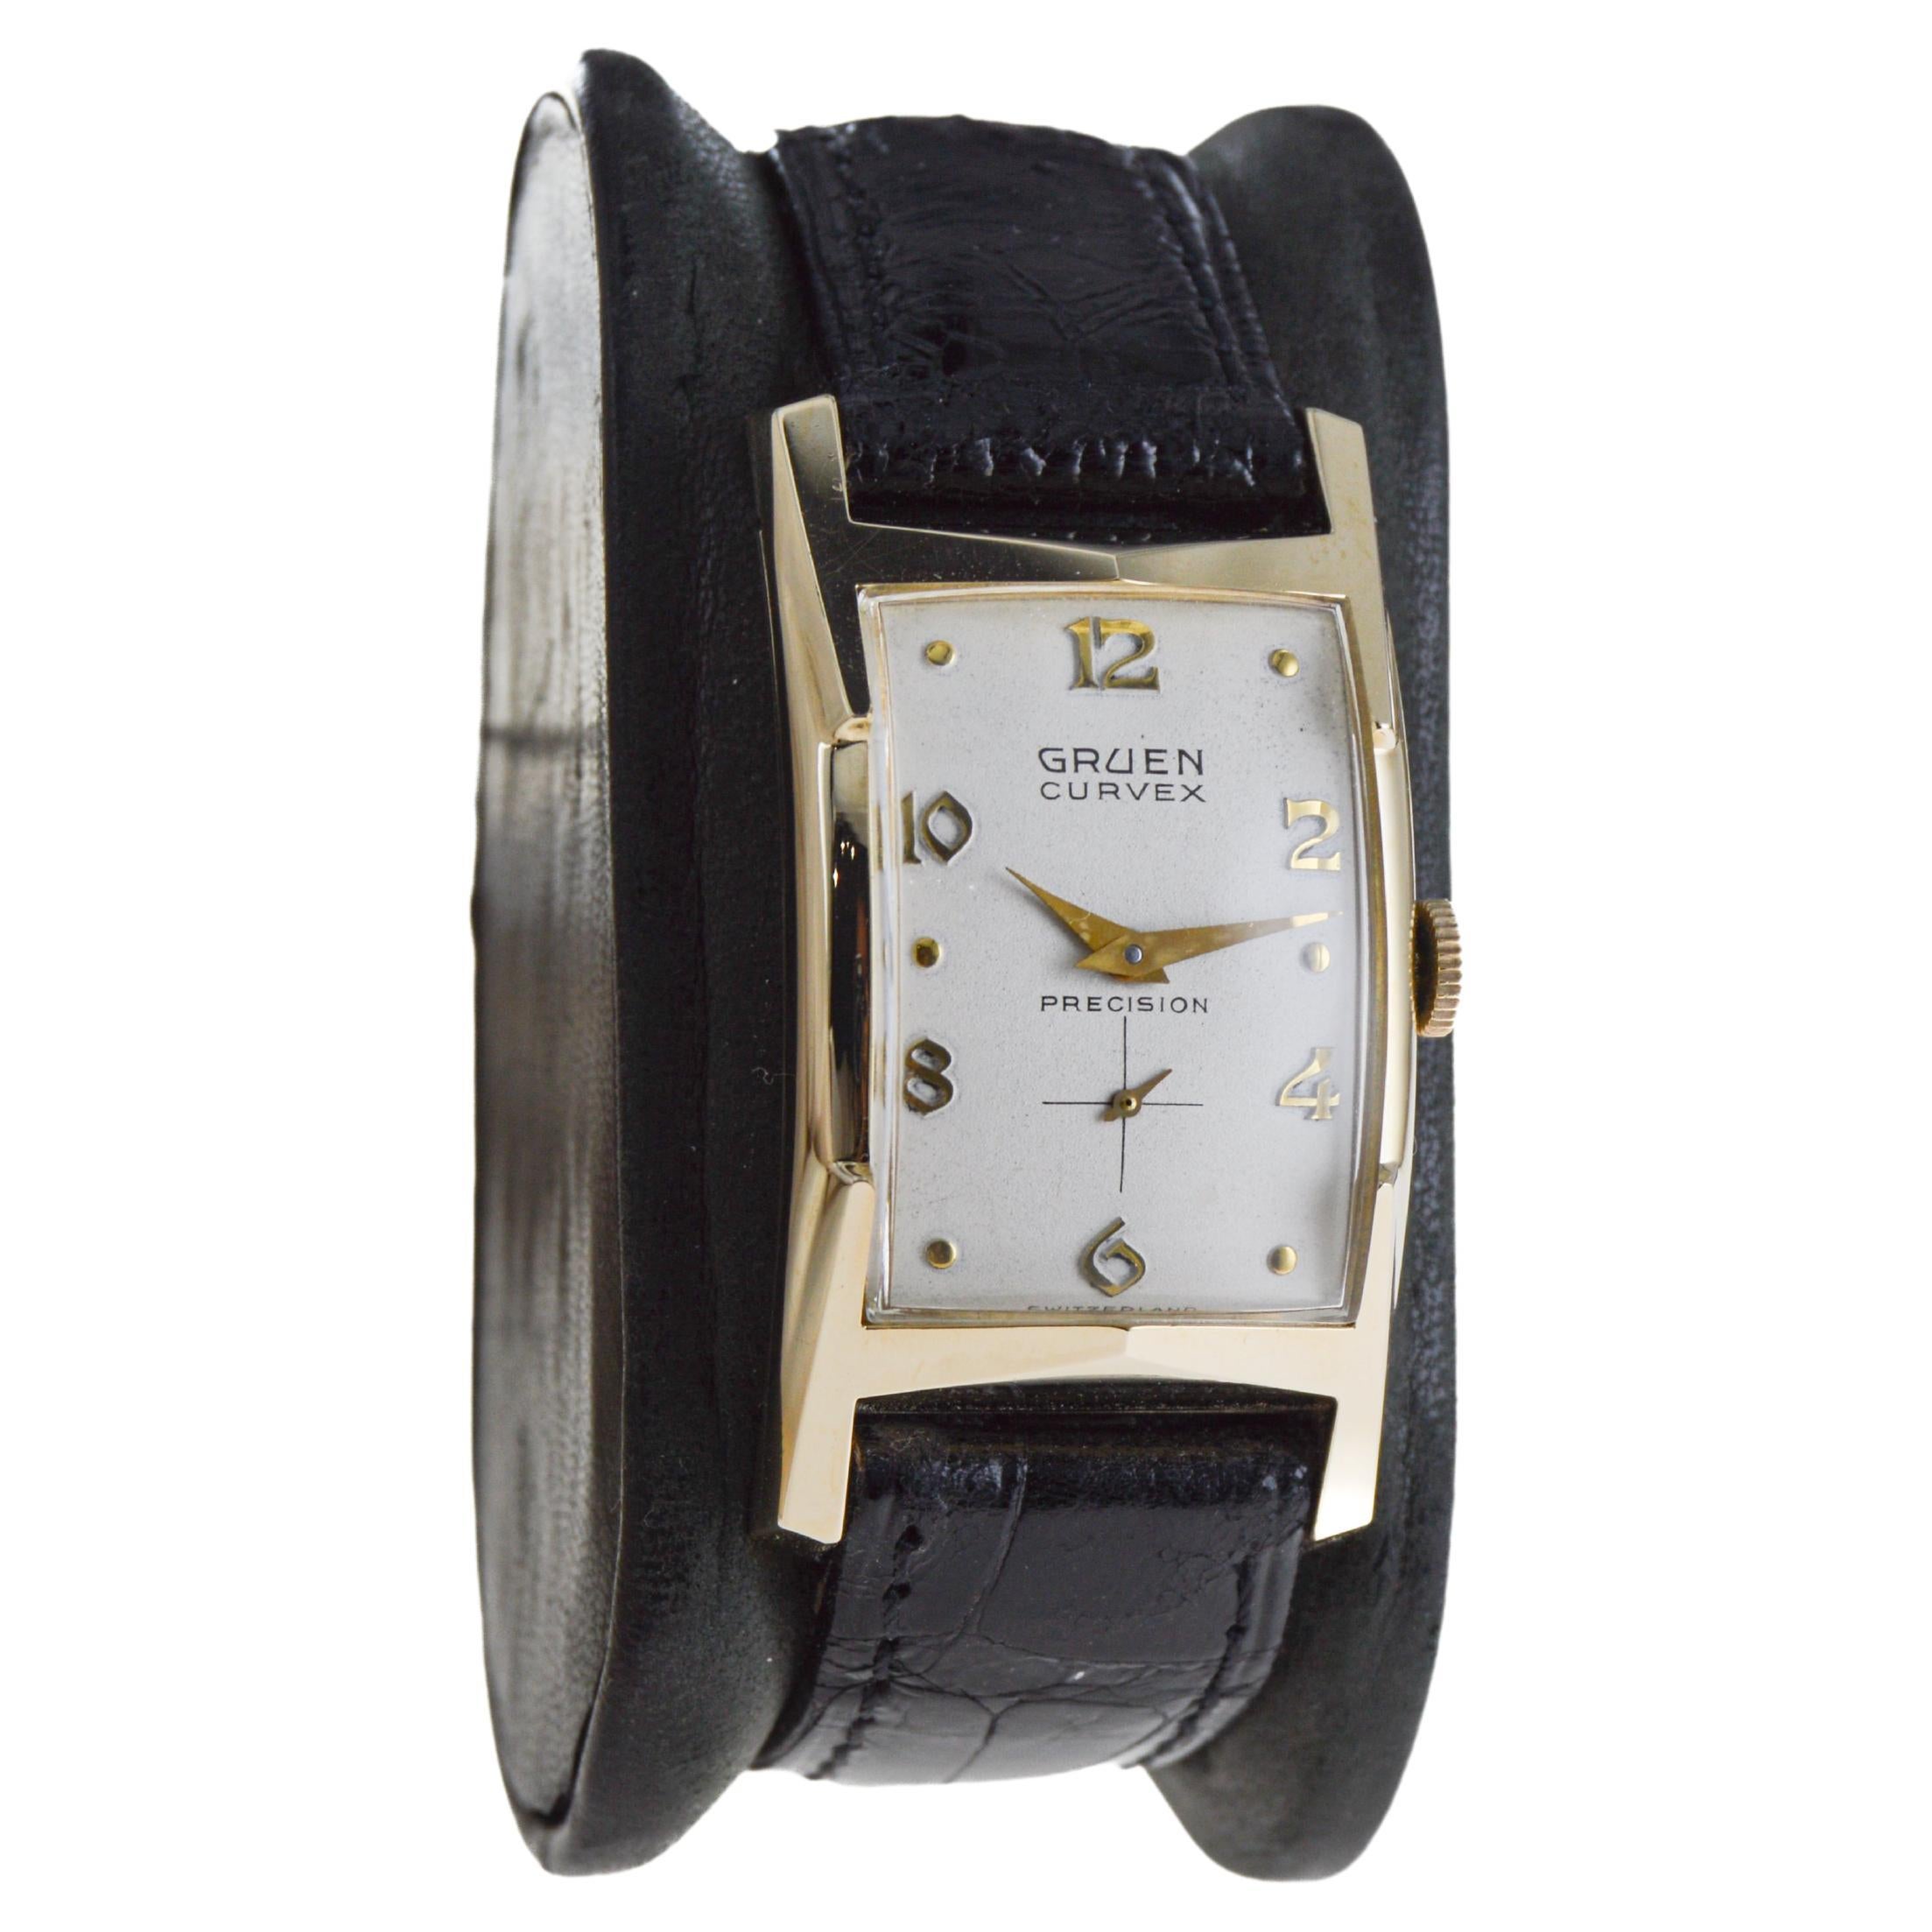 FACTORY / HOUSE: Gruen Watch Company
STYLE / REFERENCE: Baron  / Curvex Series
METAL / MATERIAL: Yellow Gold Filled
CIRCA / YEAR: 1940's /50's
DIMENSIONS / SIZE: 42mm Length X 23mm Width
MOVEMENT / CALIBER: Manual Winding / 17 Jewels / Caliber